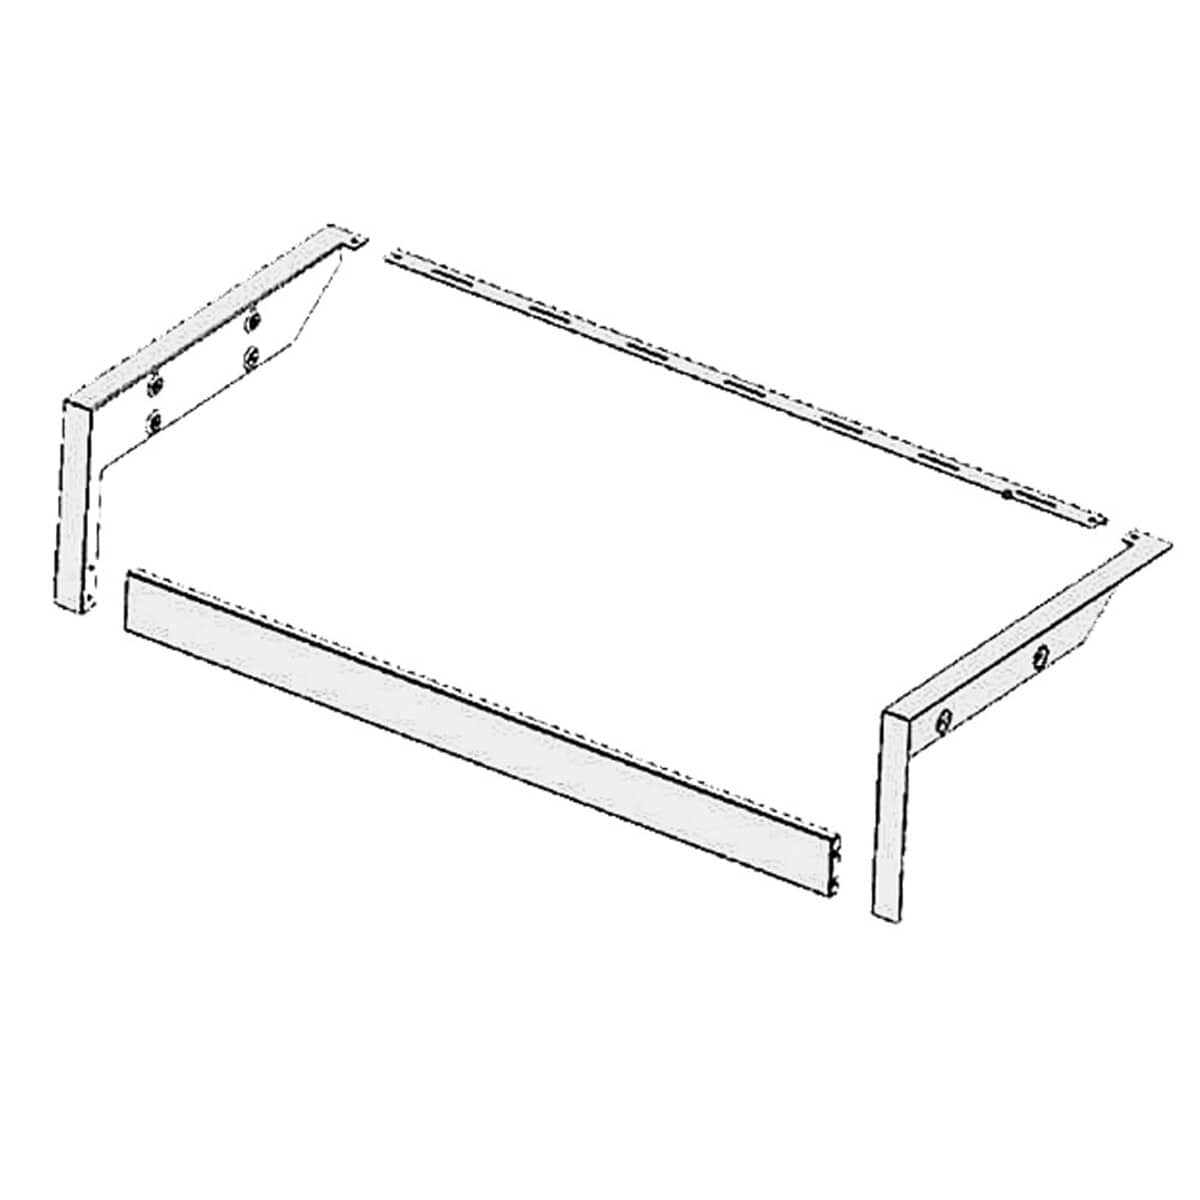 Beefeater Beefeater 1100 Series 3 Burner Built-in Trim Kit  23143 